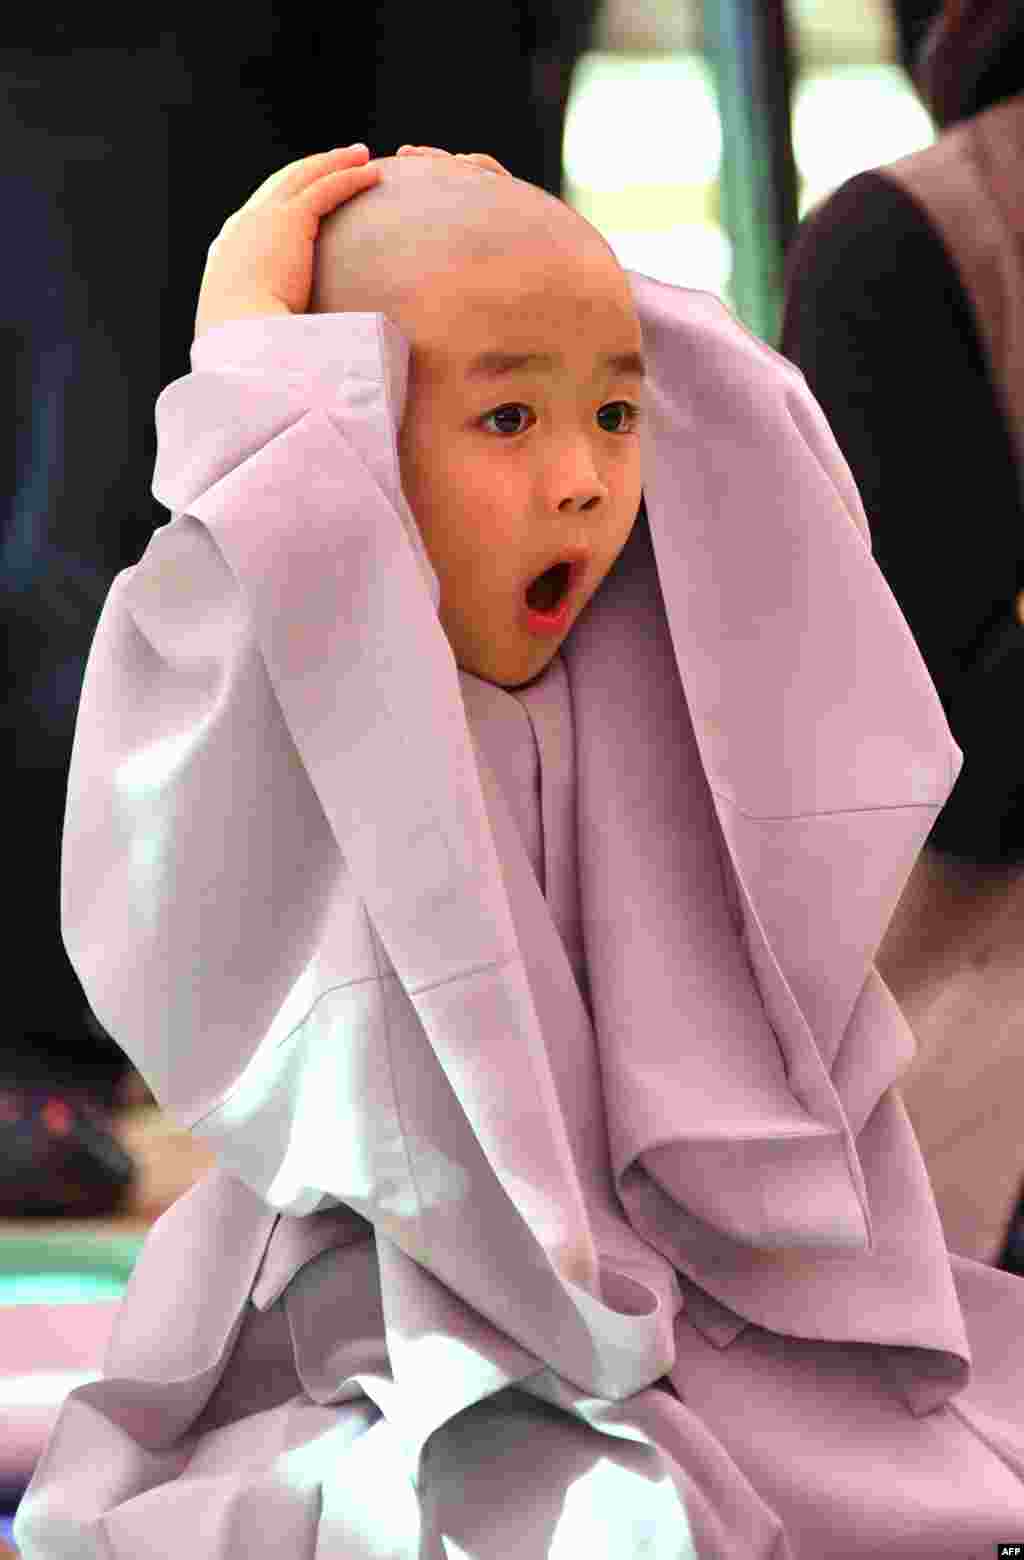 A child reacts after having his head shaved by Buddhist monks during a ceremony entitled &#39;Children Becoming Buddhist Monks&#39;, at the Jogye temple in Seoul, South Korea.